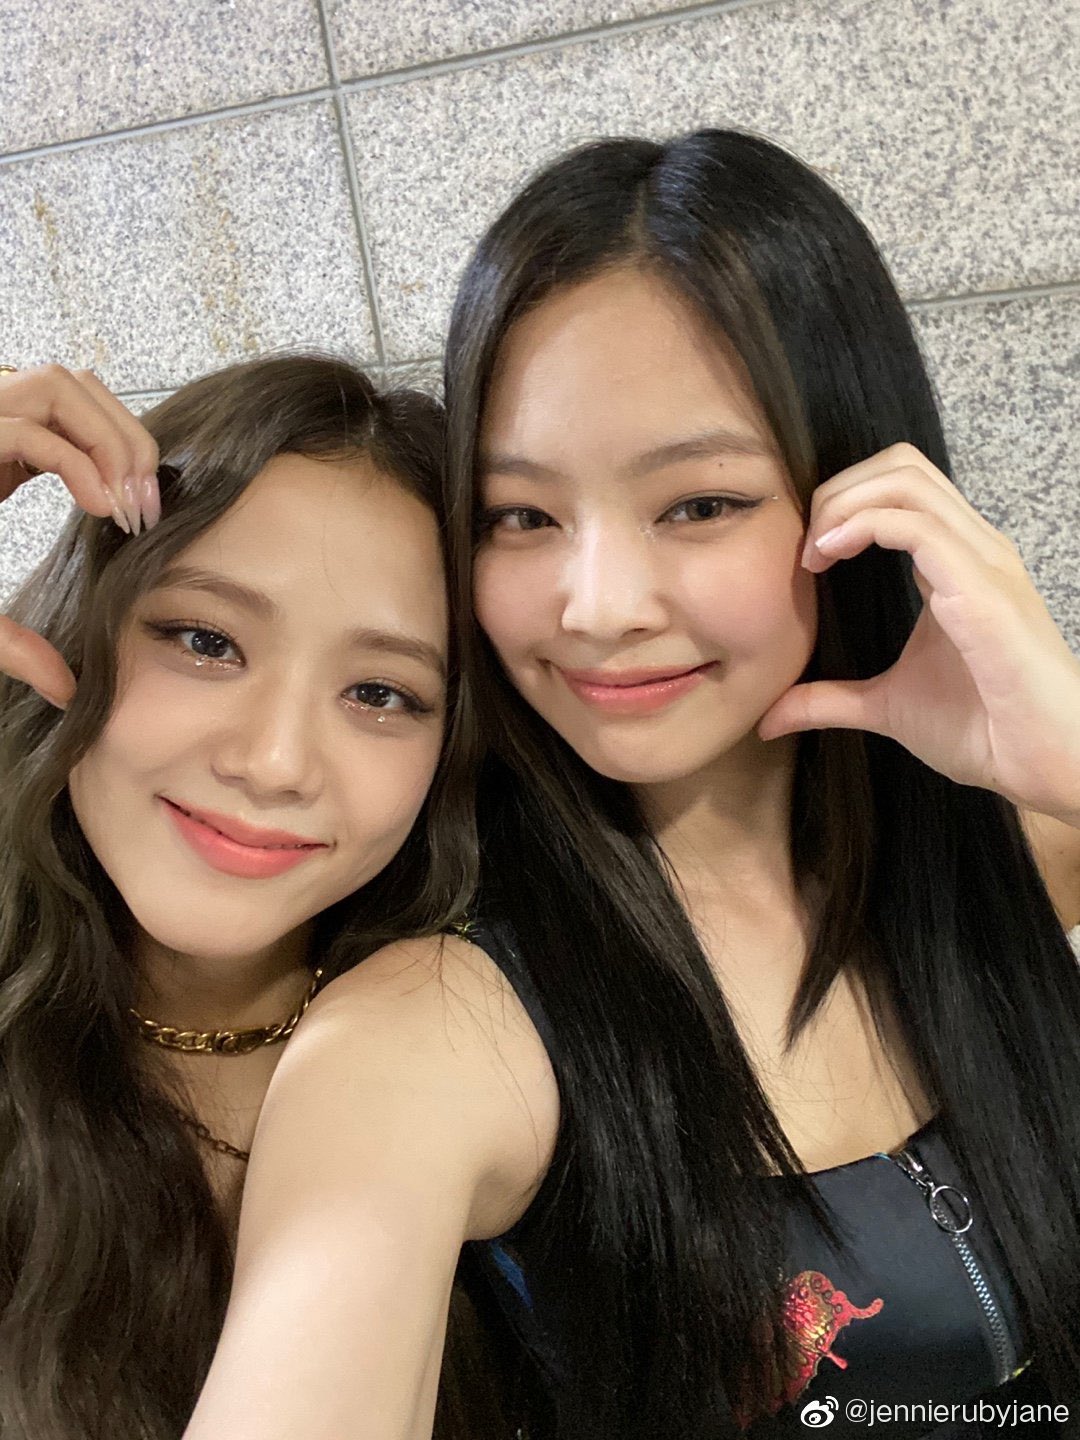 Blackpink S Jennie Showed Protective Side By Shielding Jisoo From Being Exposed Koreaboo